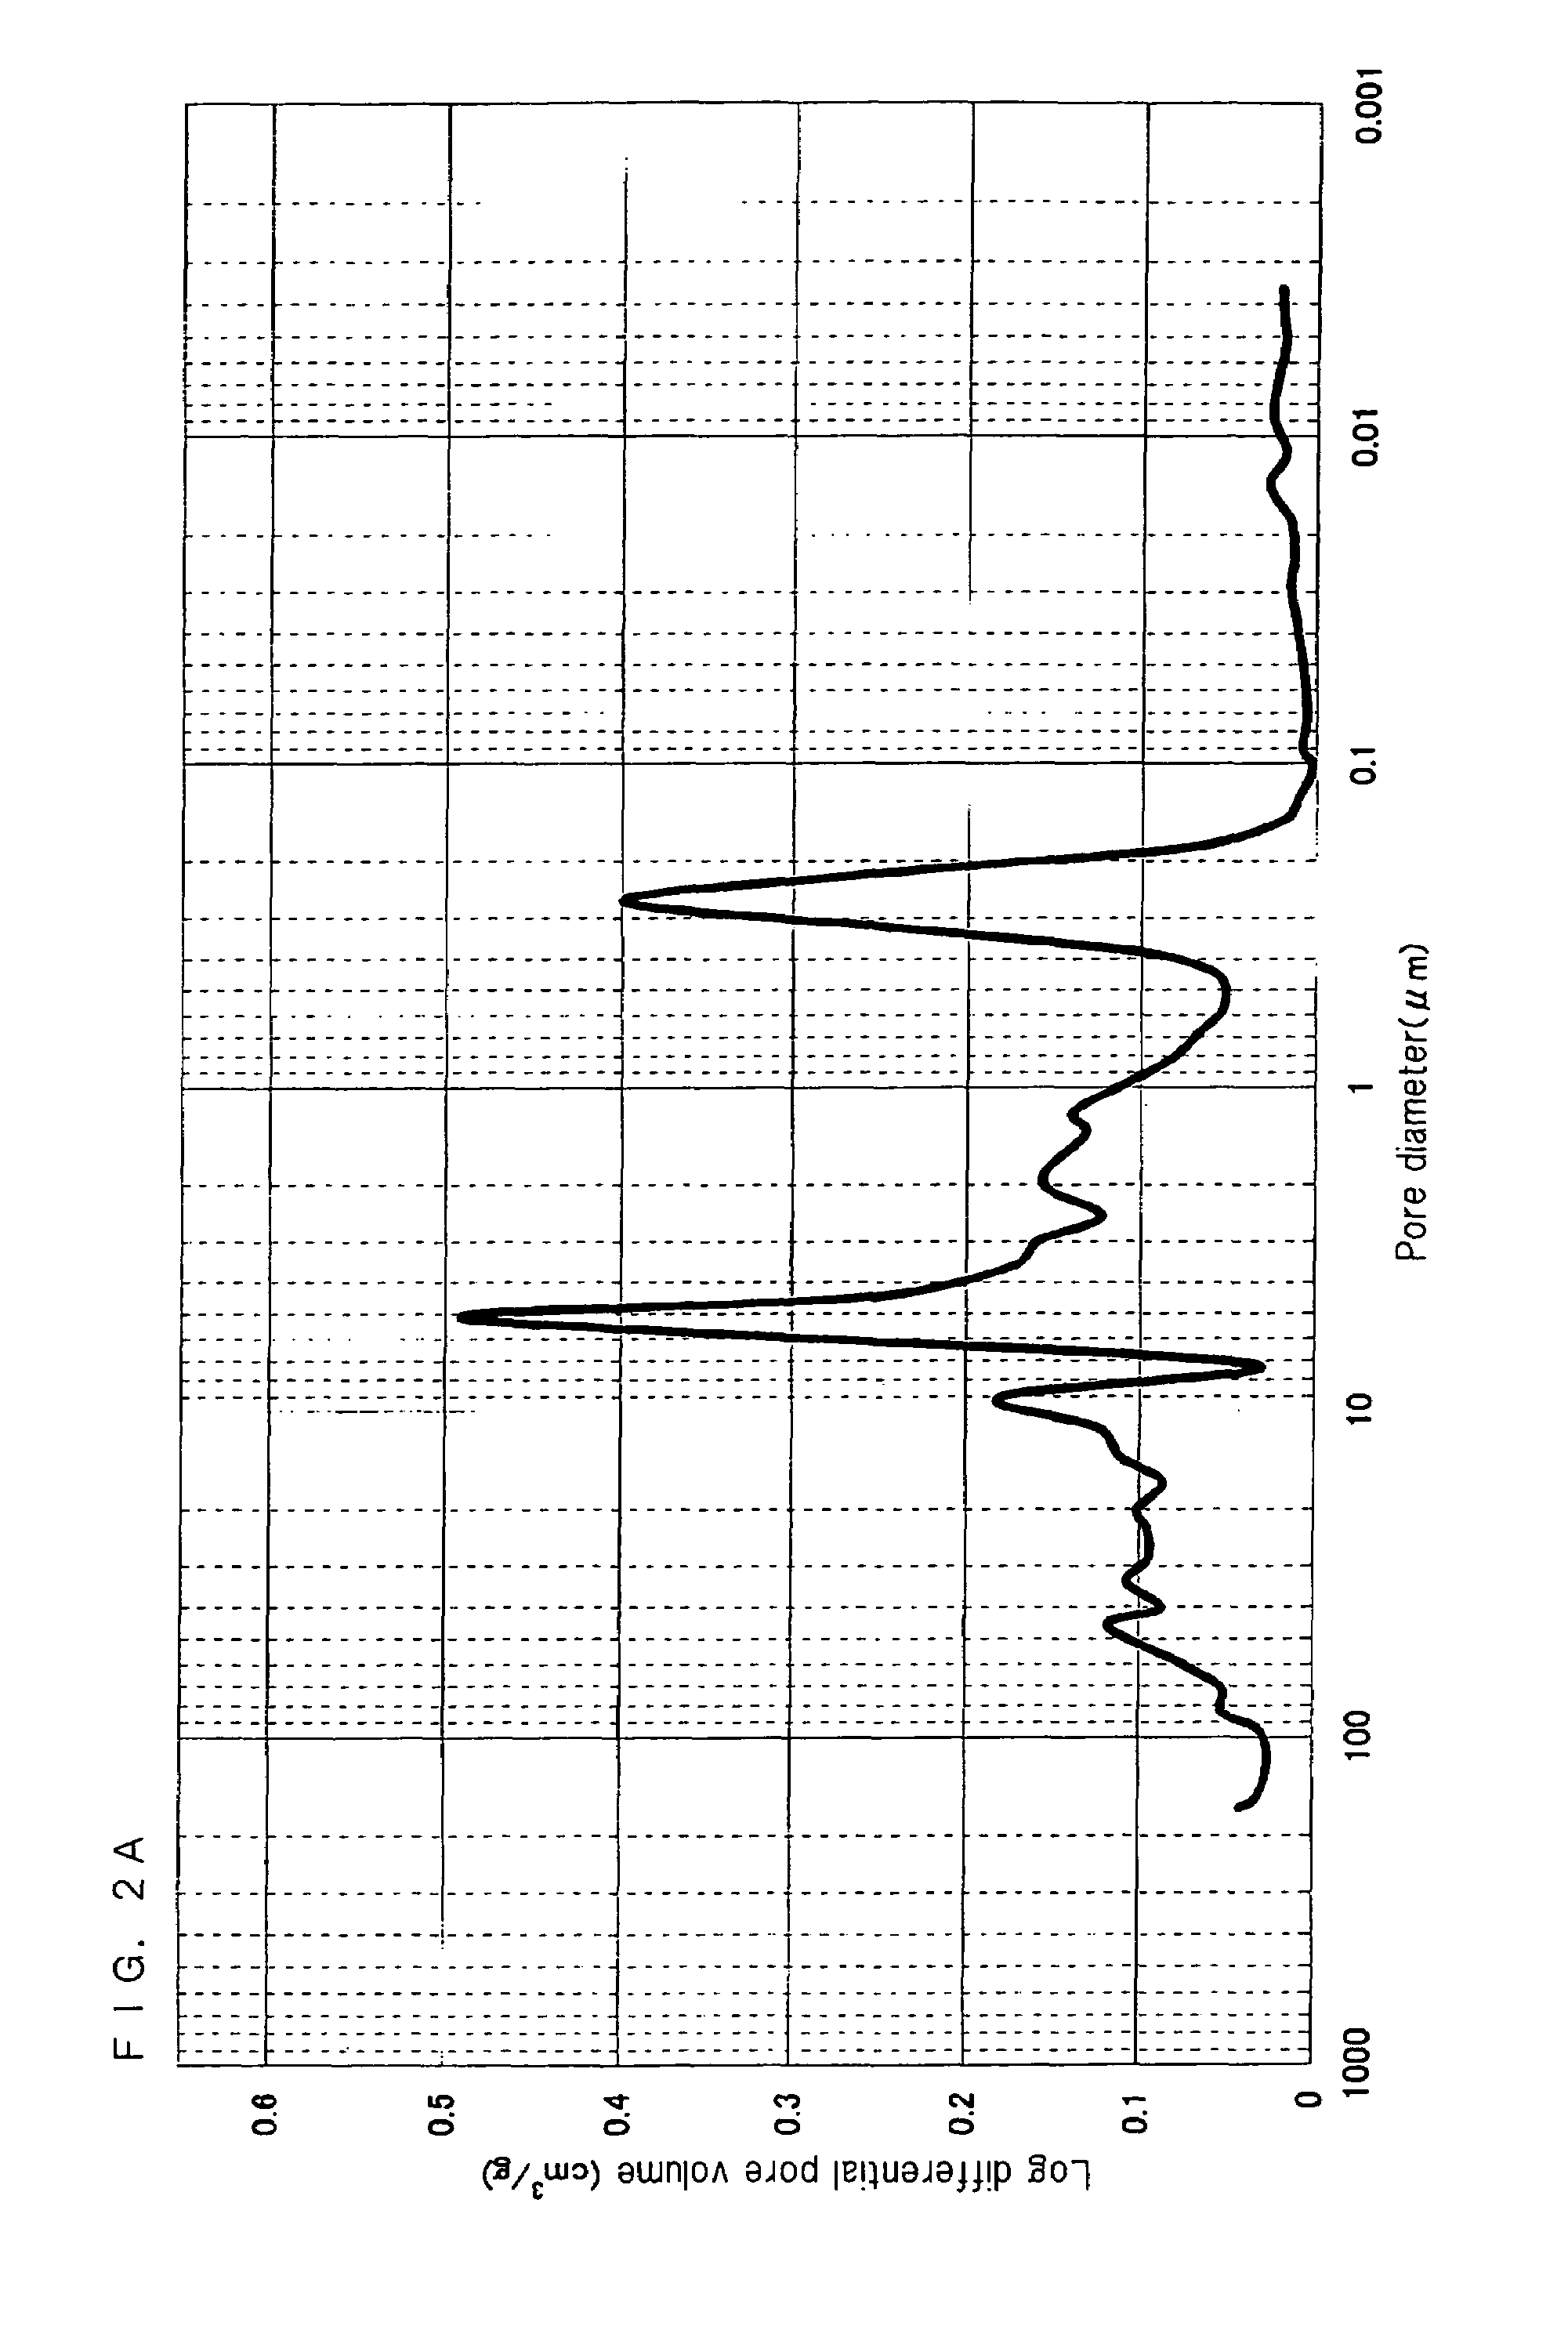 Catalyst for production of ethylene oxide and method for production of ethylene oxide